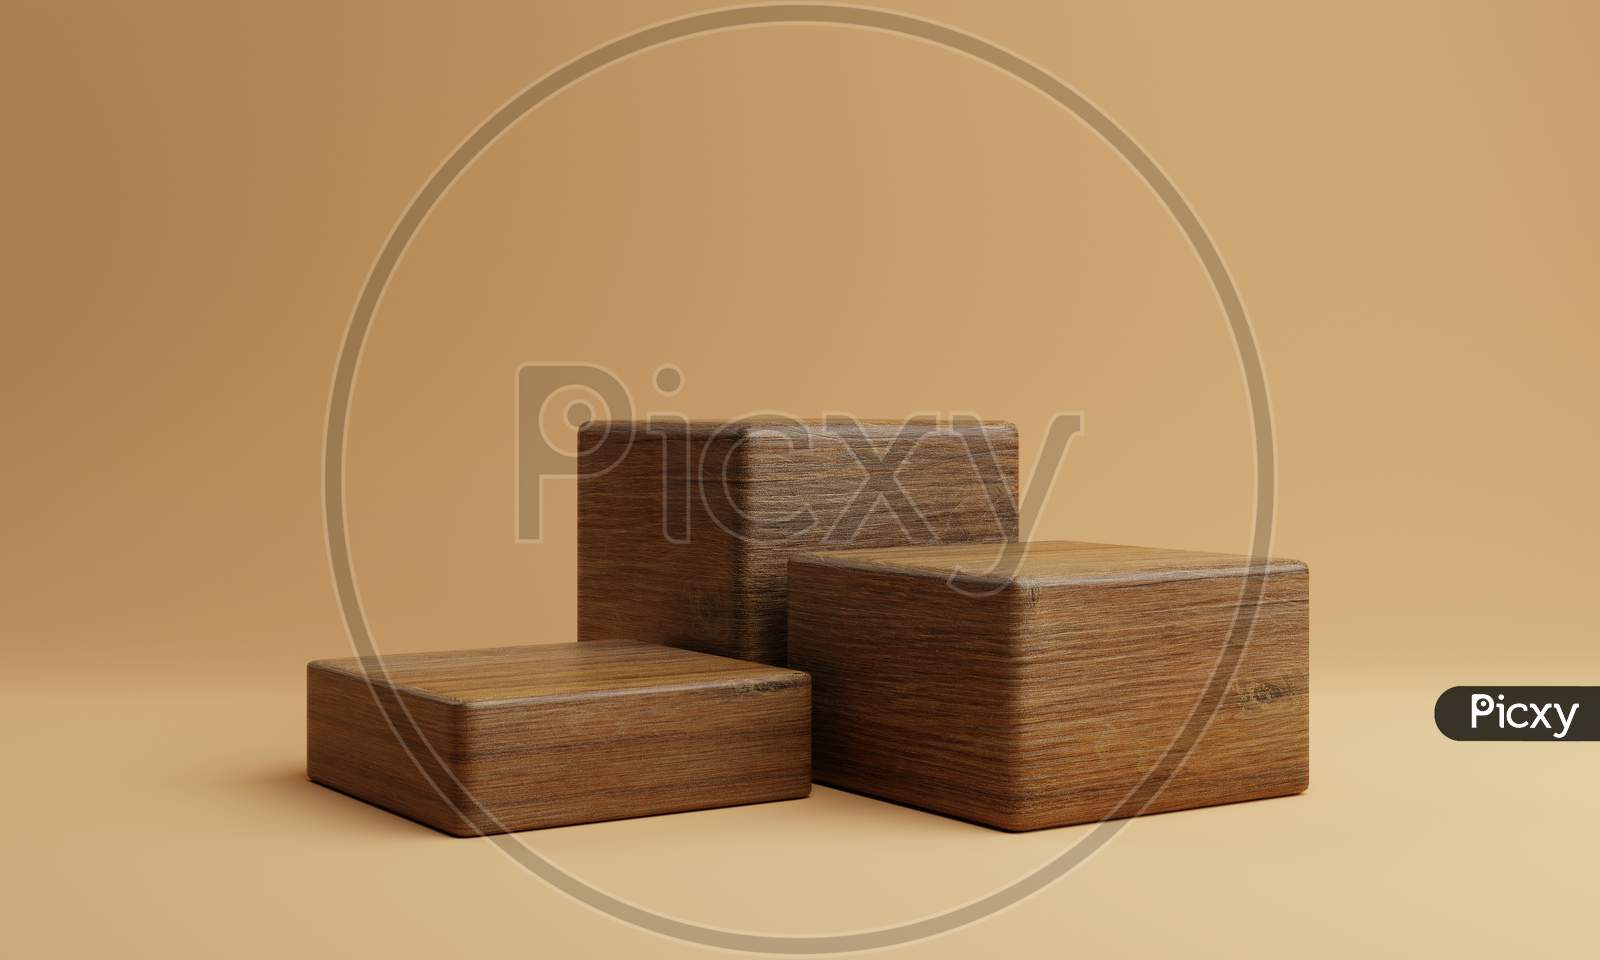 Three Brown Wooden Rectangle Cube Product Stage Podium On Orange Background. Minimal Fashion Theme. Geometry Exhibition Stage Mockup Concept. 3D Illustration Rendering Graphic Design